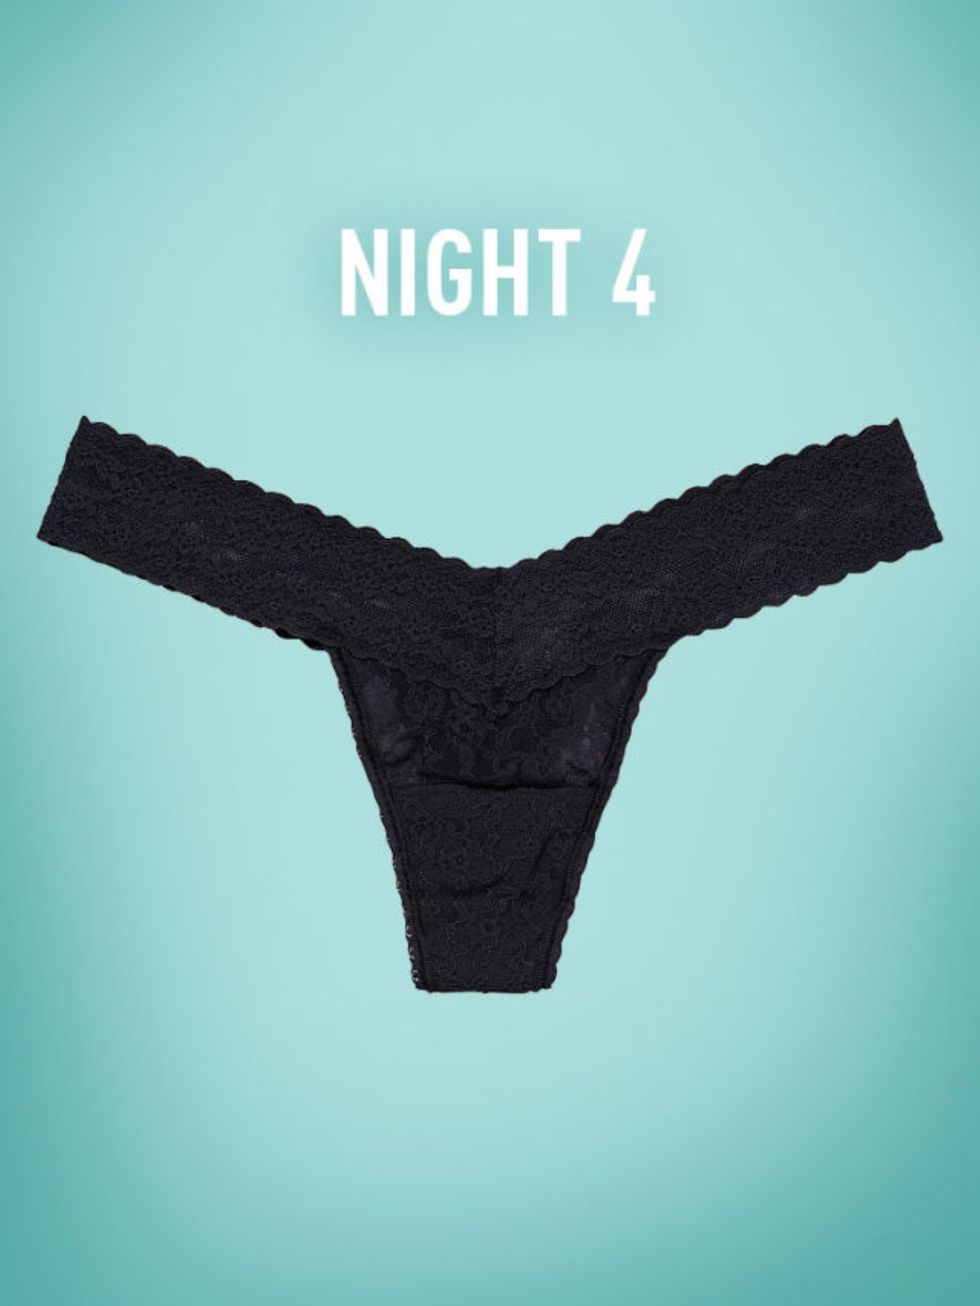 I wore lingerie to bed for seven nights - night four